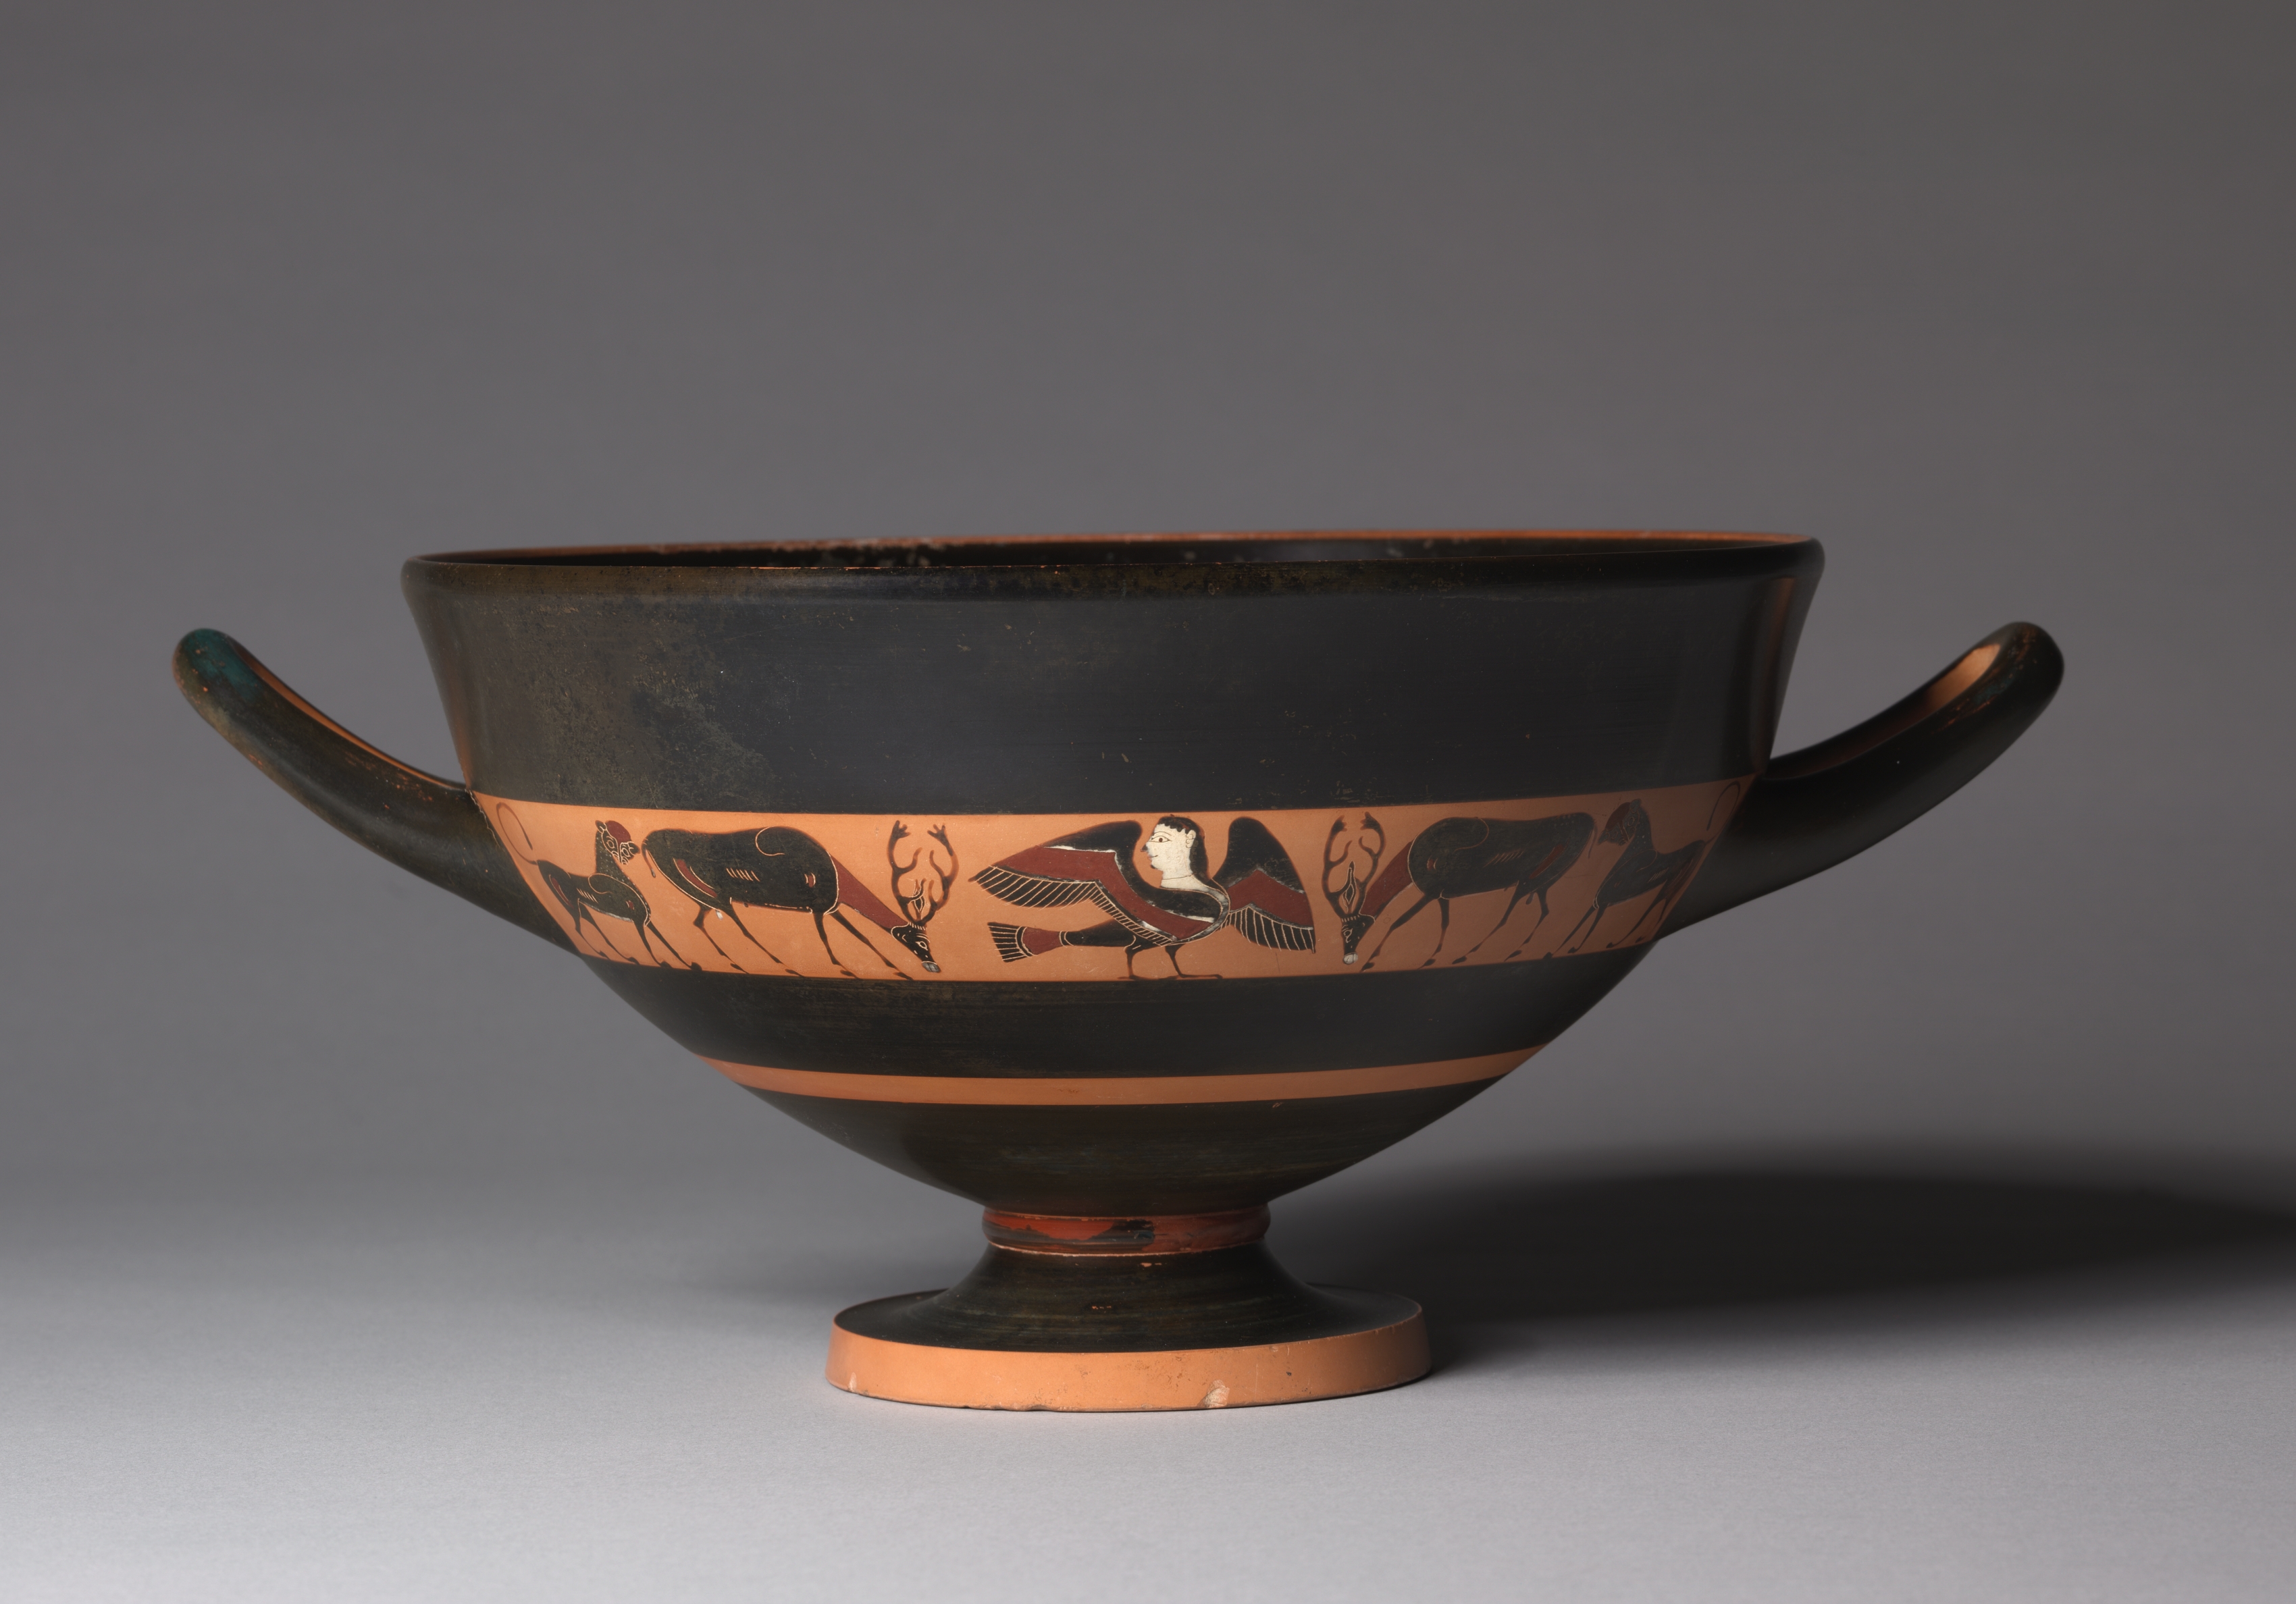 Black-Figure Band Skyphos (Drinking Cup): Sirens, Stags, and Panthers